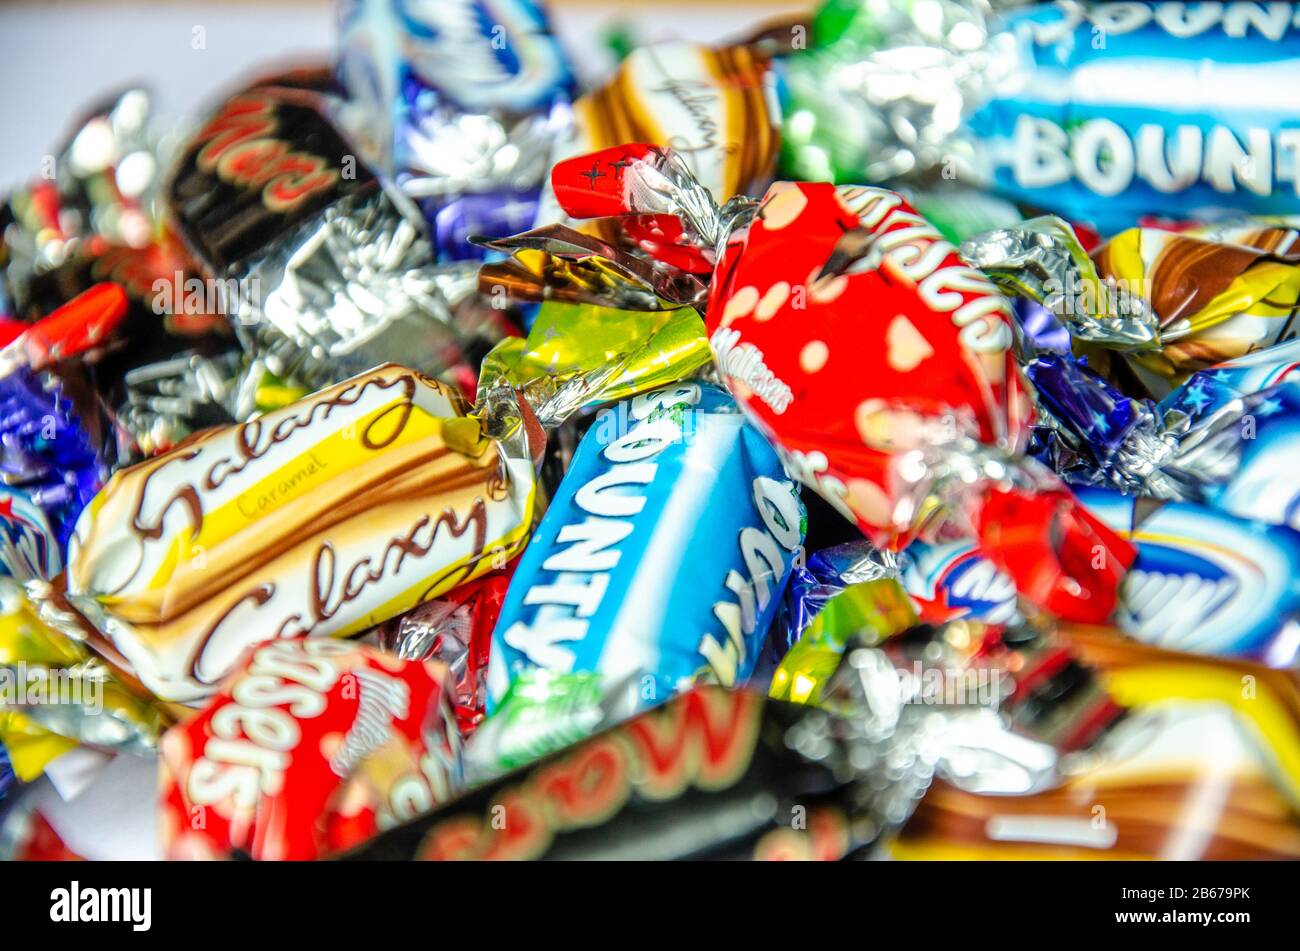 Close up view of Mars Celebrations miniature chocolates. Tasty but high calorie, fattening treats. Stock Photo